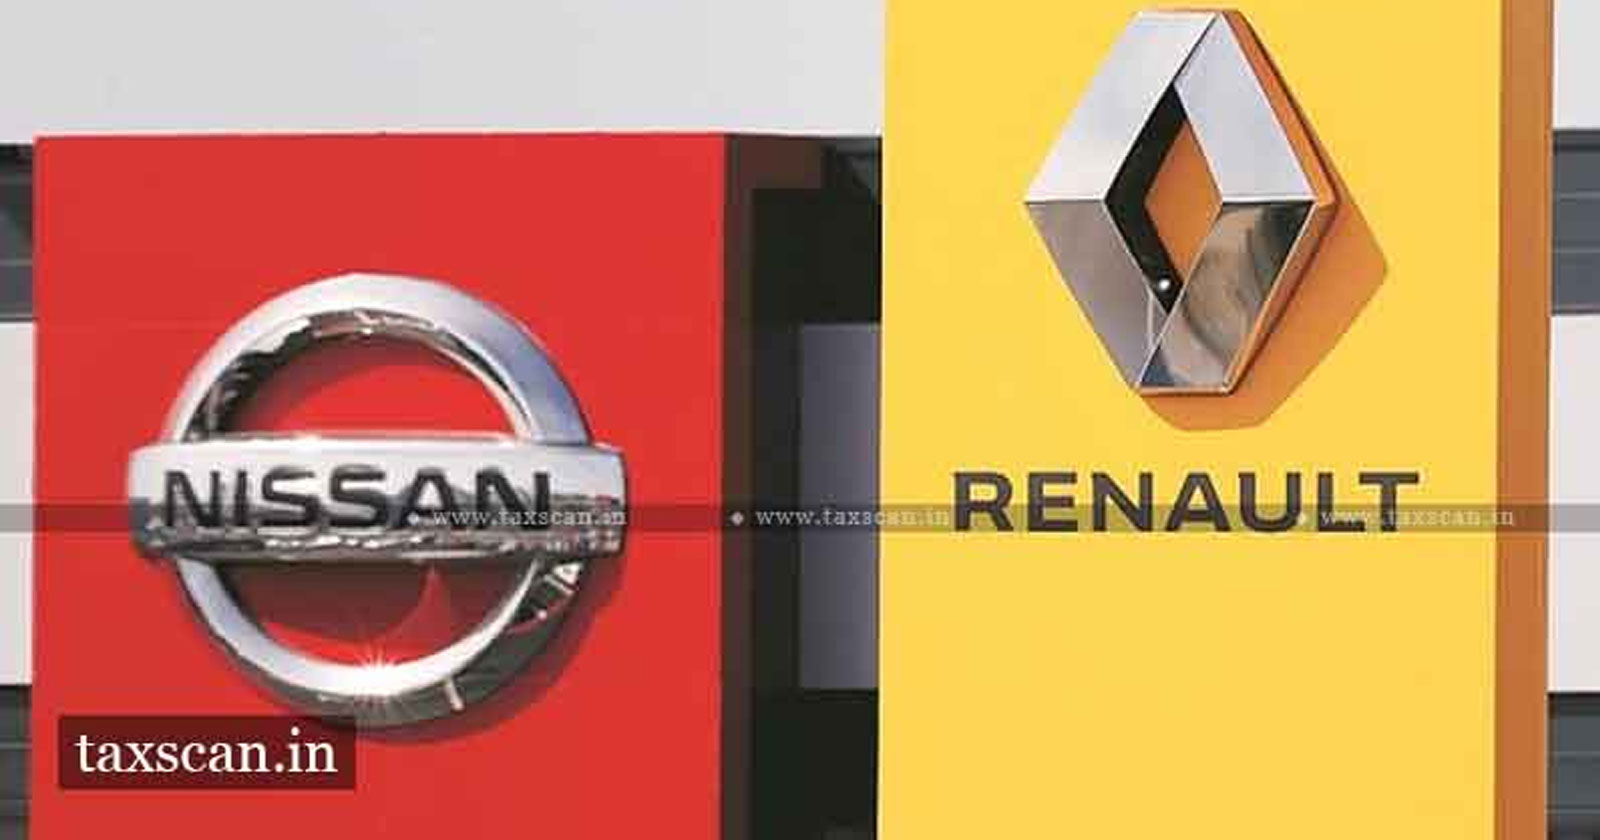 Relief to Renault Nissan Automotive India - Relief - CESTAT - CESTAT Refund Claim cannot be rejected for not opting Provisional Assessment - taxscan